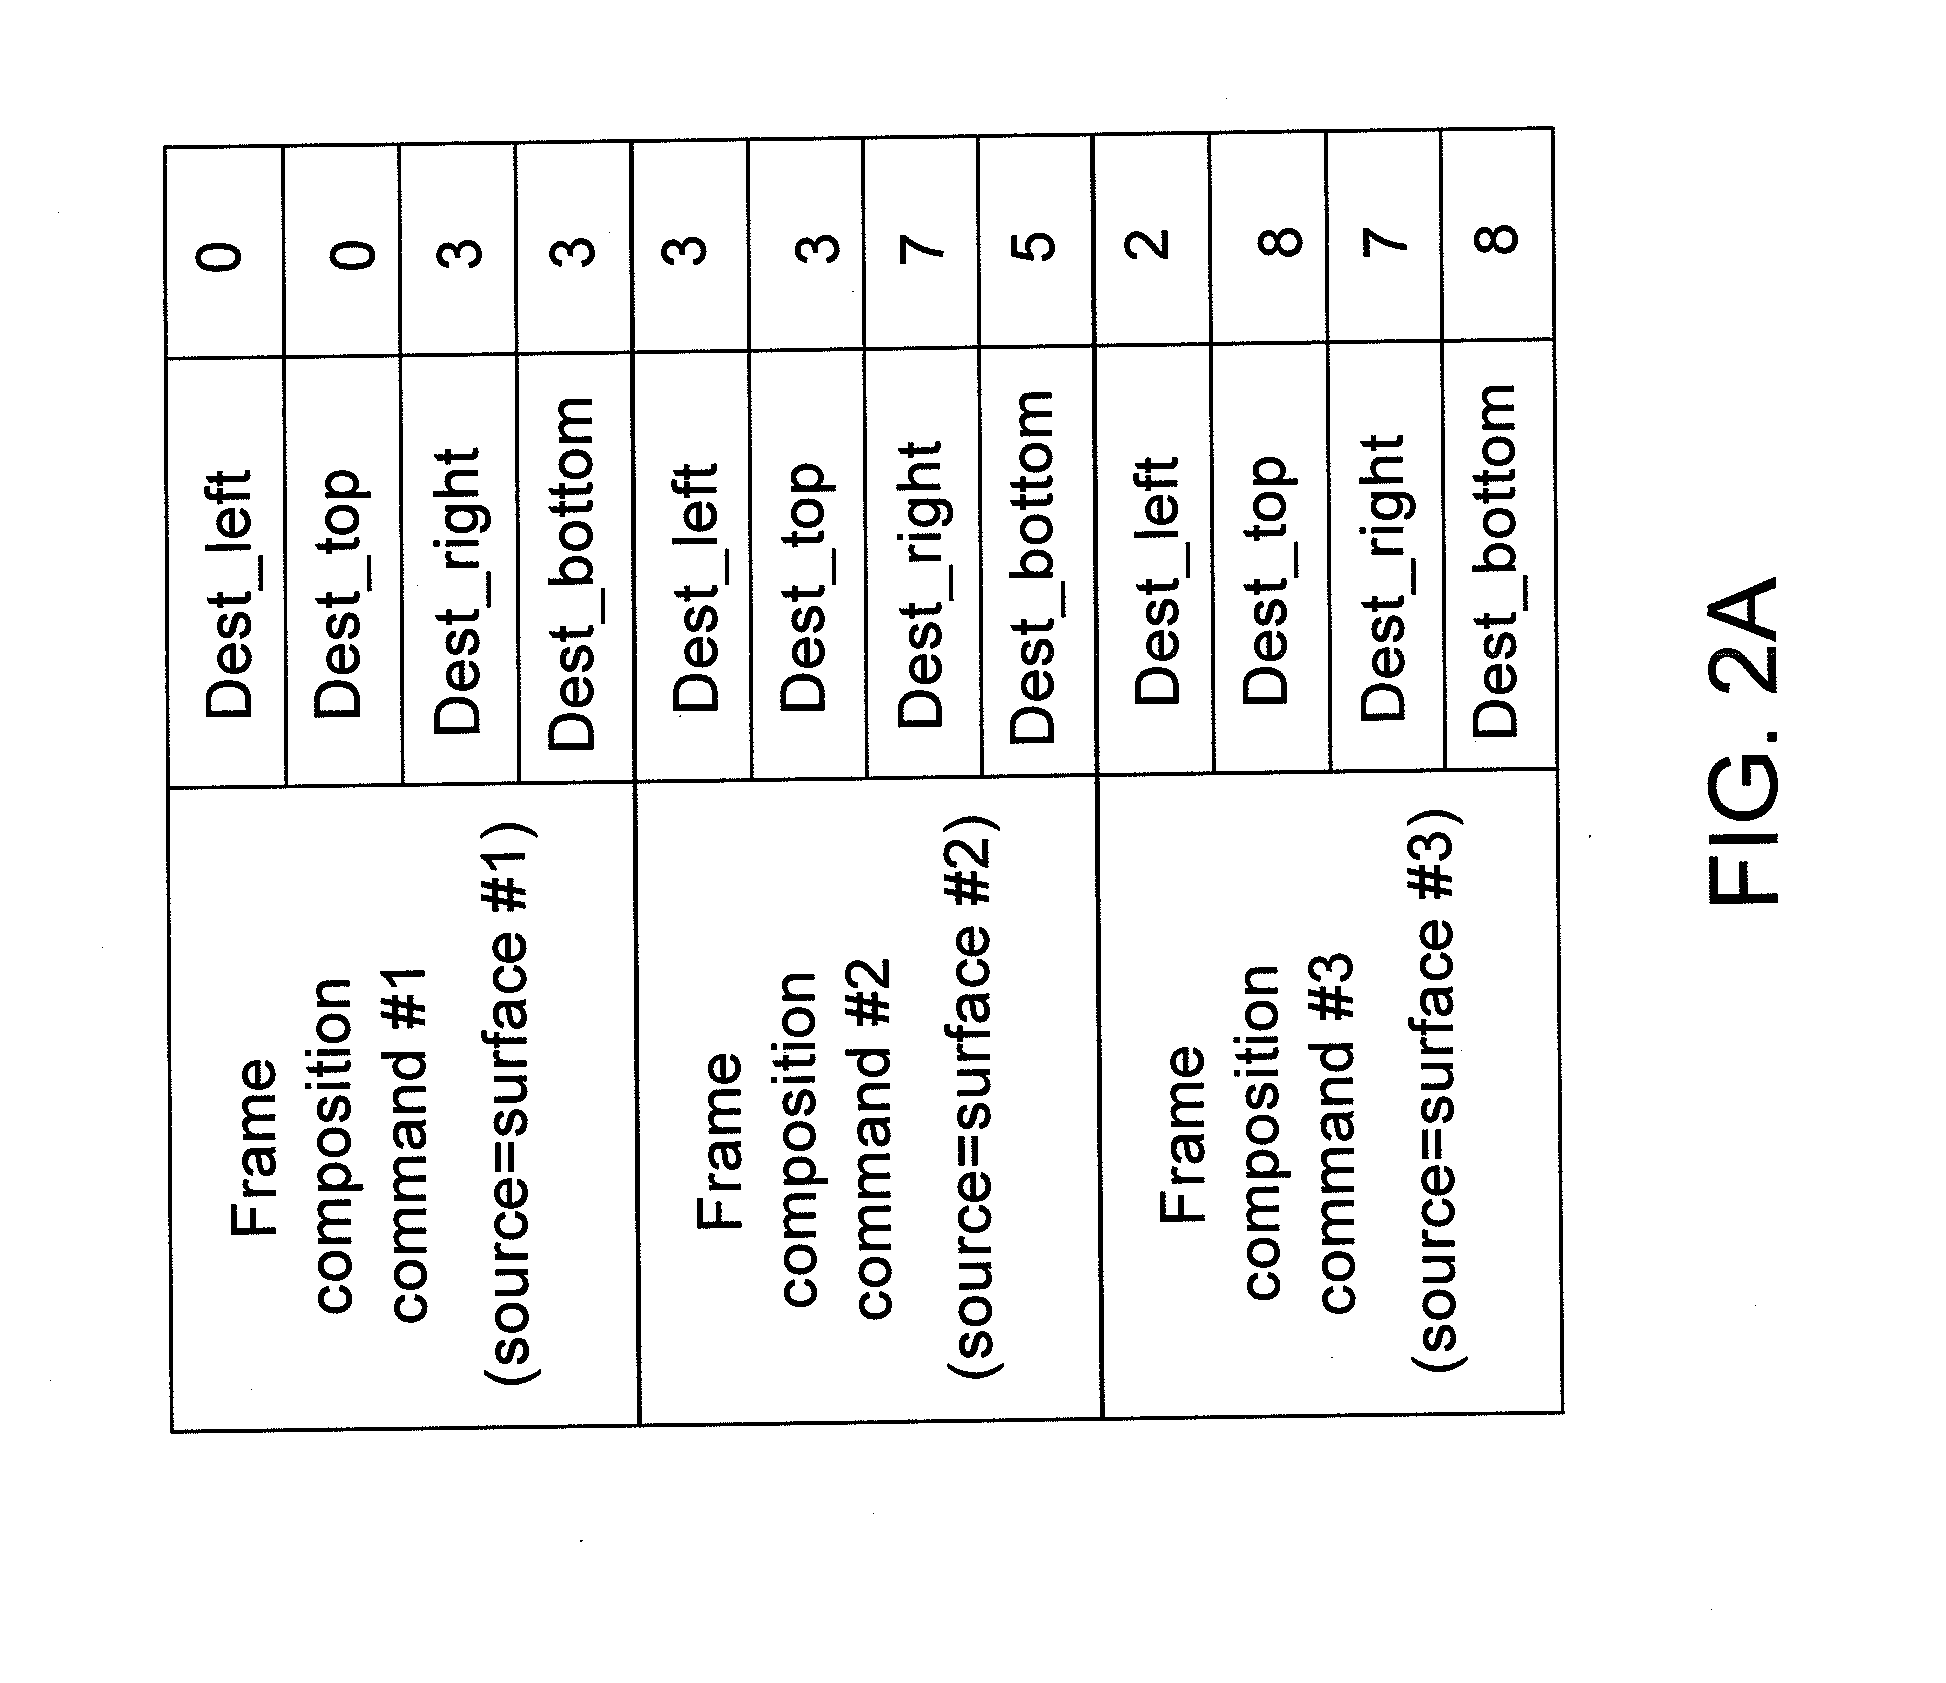 Method and Apparatus for Displaying Images